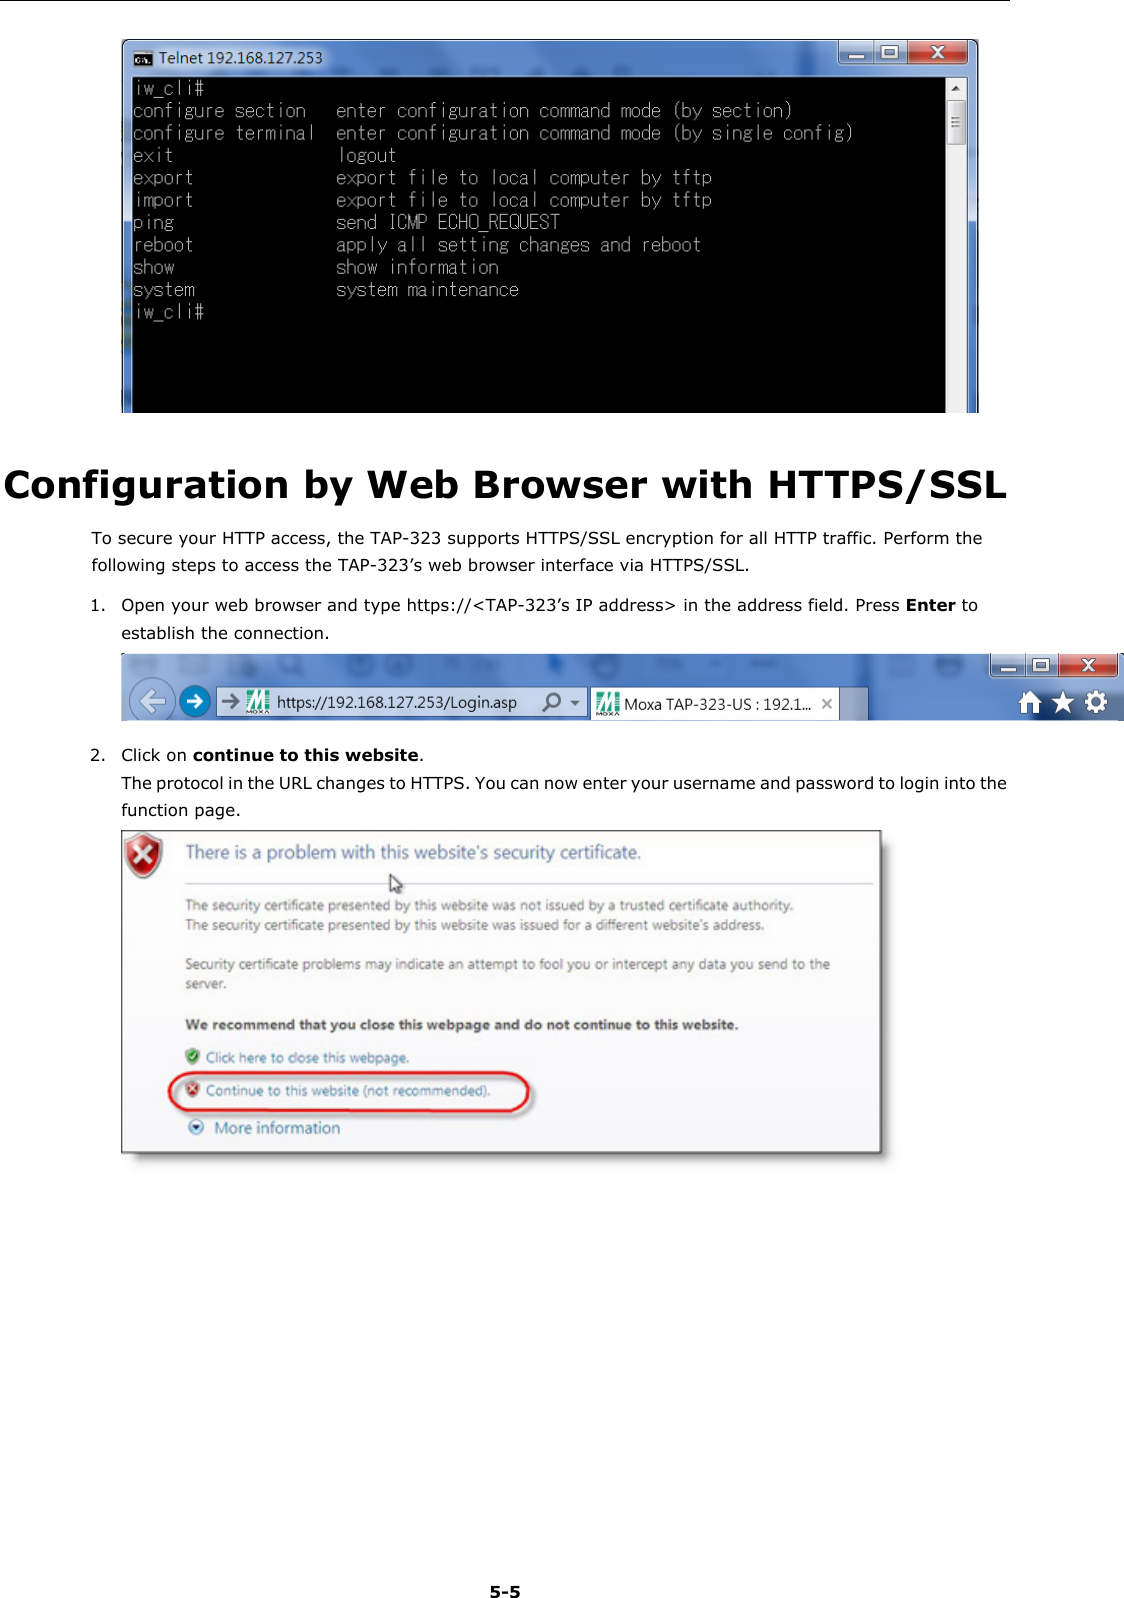   5-5  Configuration by Web Browser with HTTPS/SSL To secure your HTTP access, the TAP-323 supports HTTPS/SSL encryption for all HTTP traffic. Perform the following steps to access the TAP-323’s web browser interface via HTTPS/SSL. 1. Open your web browser and type https://&lt;TAP-323’s IP address&gt; in the address field. Press Enter to establish the connection.  2. Click on continue to this website. The protocol in the URL changes to HTTPS. You can now enter your username and password to login into the function page.        